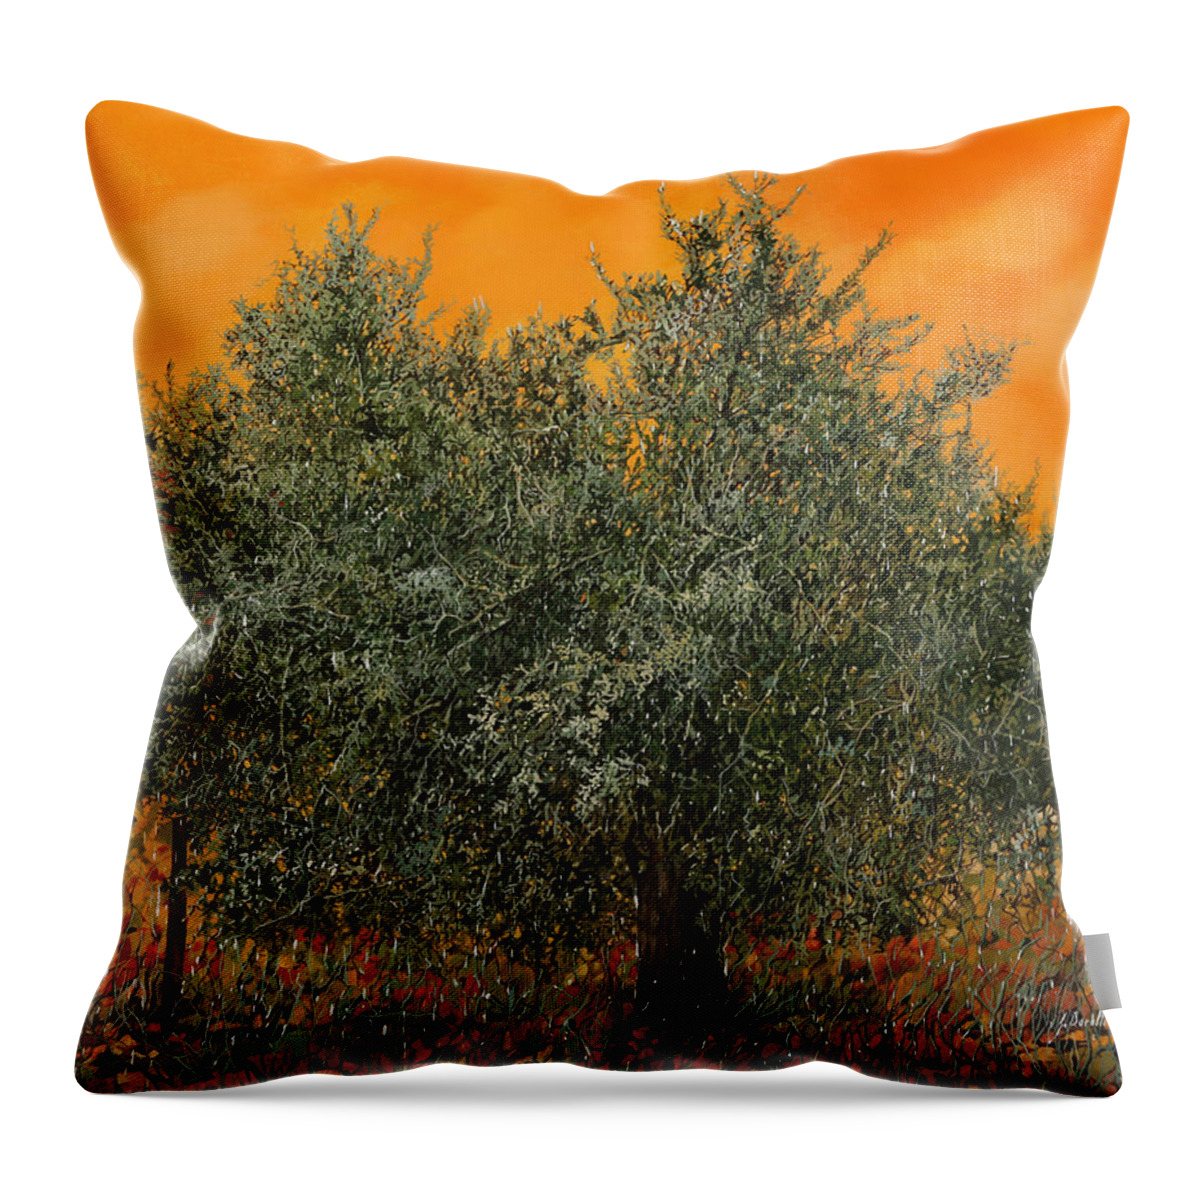 Olive Tree Throw Pillow featuring the painting Un Altro Ulivo Al Tramonto by Guido Borelli